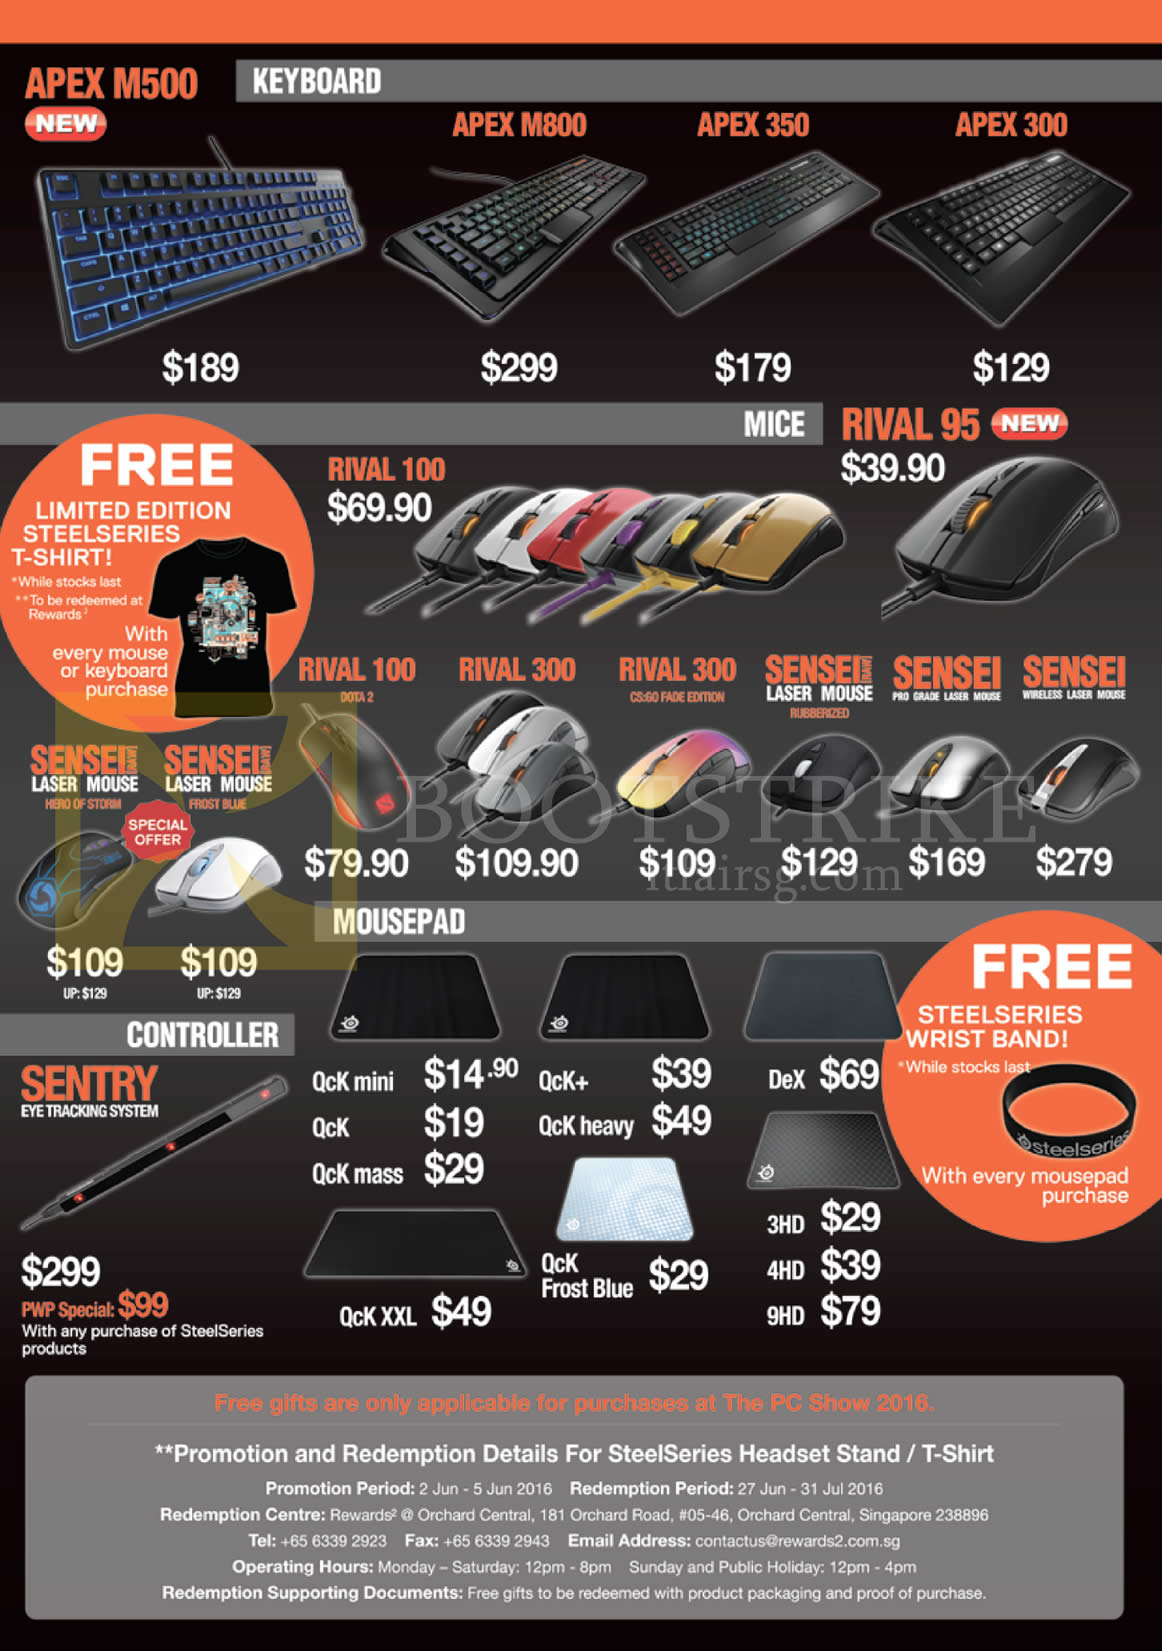 PC SHOW 2016 price list image brochure of Steelseries Cybermind Keyboards, Mouses, Mousepads, Controllers, Apex M800, 350, 300, Rival 100, 95, 300, Sensei Laser Mouse, QcK Mini, Mass, Plus, Heavy, Dex, QcK XXL, Frost Blue